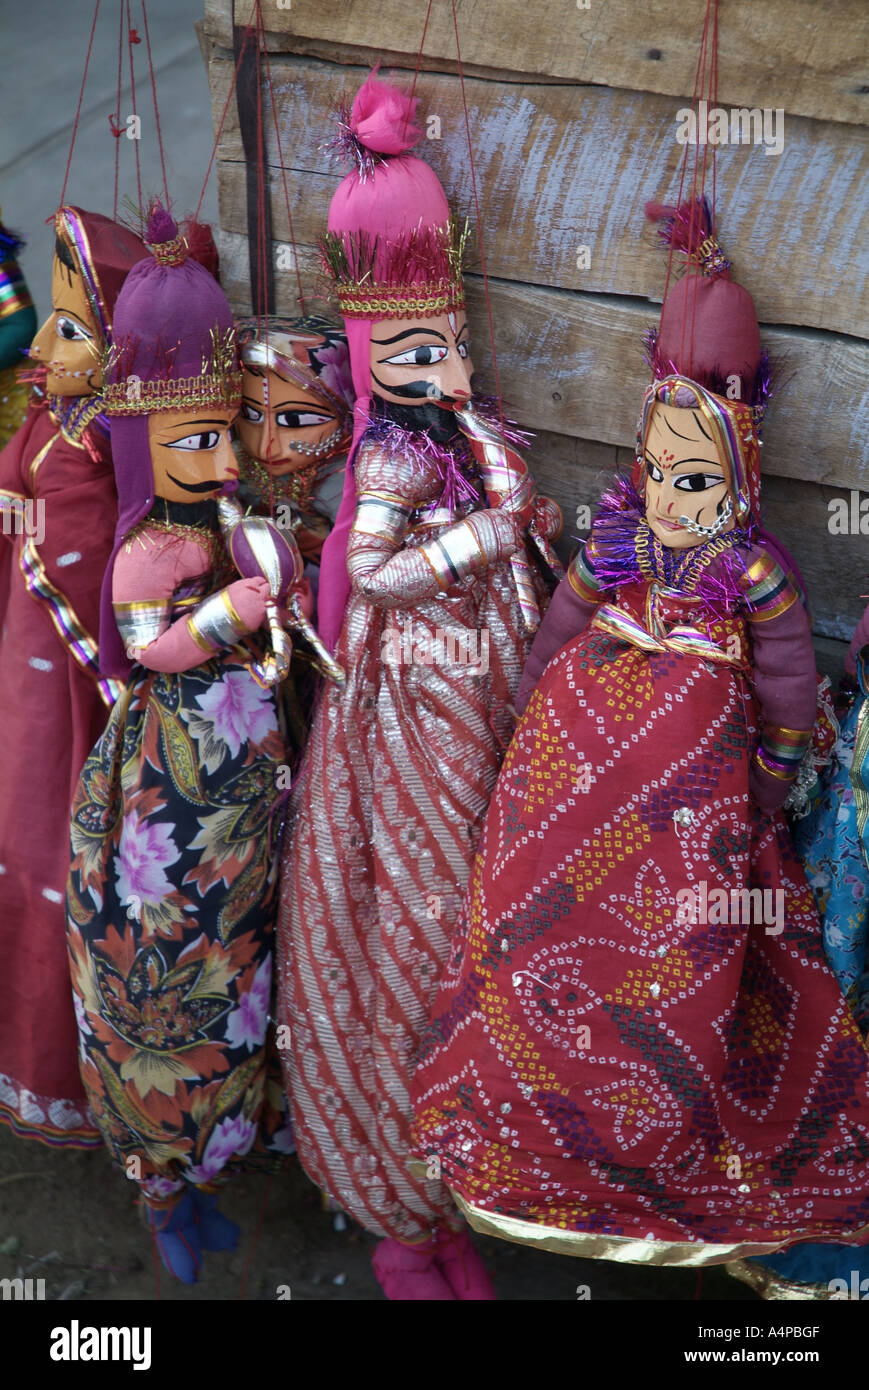 Colourful Rajasthani puppets for sale in Jaipur India Stock Photo